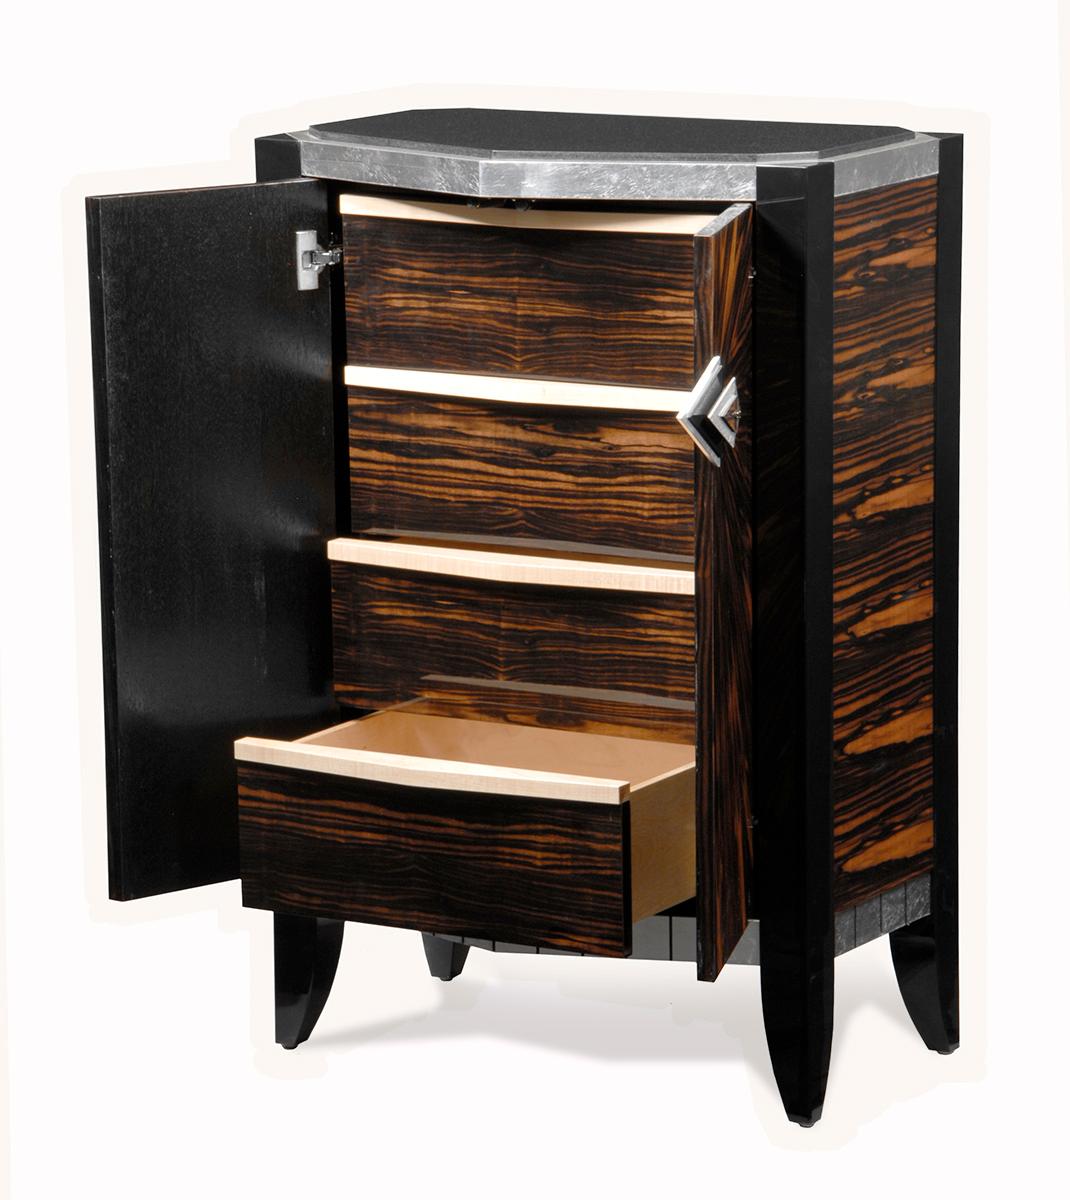 Chevron Accent Cabinet Chest of drawers New York Version is part of the Chevron series. It has a black granite top with a silver leaf sub top which complement the starbust ebony macassar doors. There are jet black maple legs and leg tops which